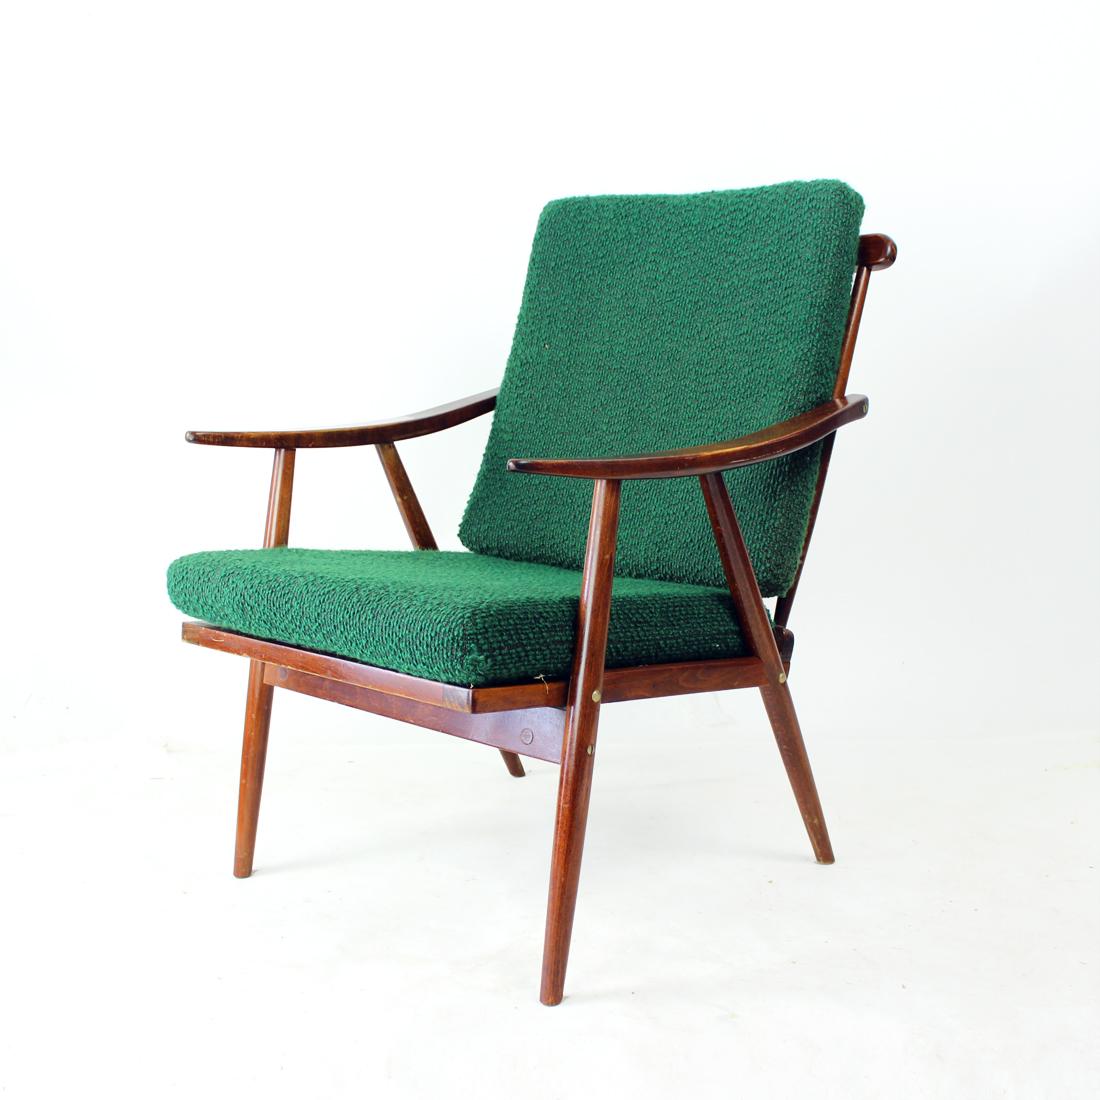 Iconic Boomerang armchair produced by TON company in 1960s in Czechoslovakia. The name comes from the curved armrests. The chair is produced as elegant and airy design with light, but strong construction. The seat and backrest cushion are in vintage